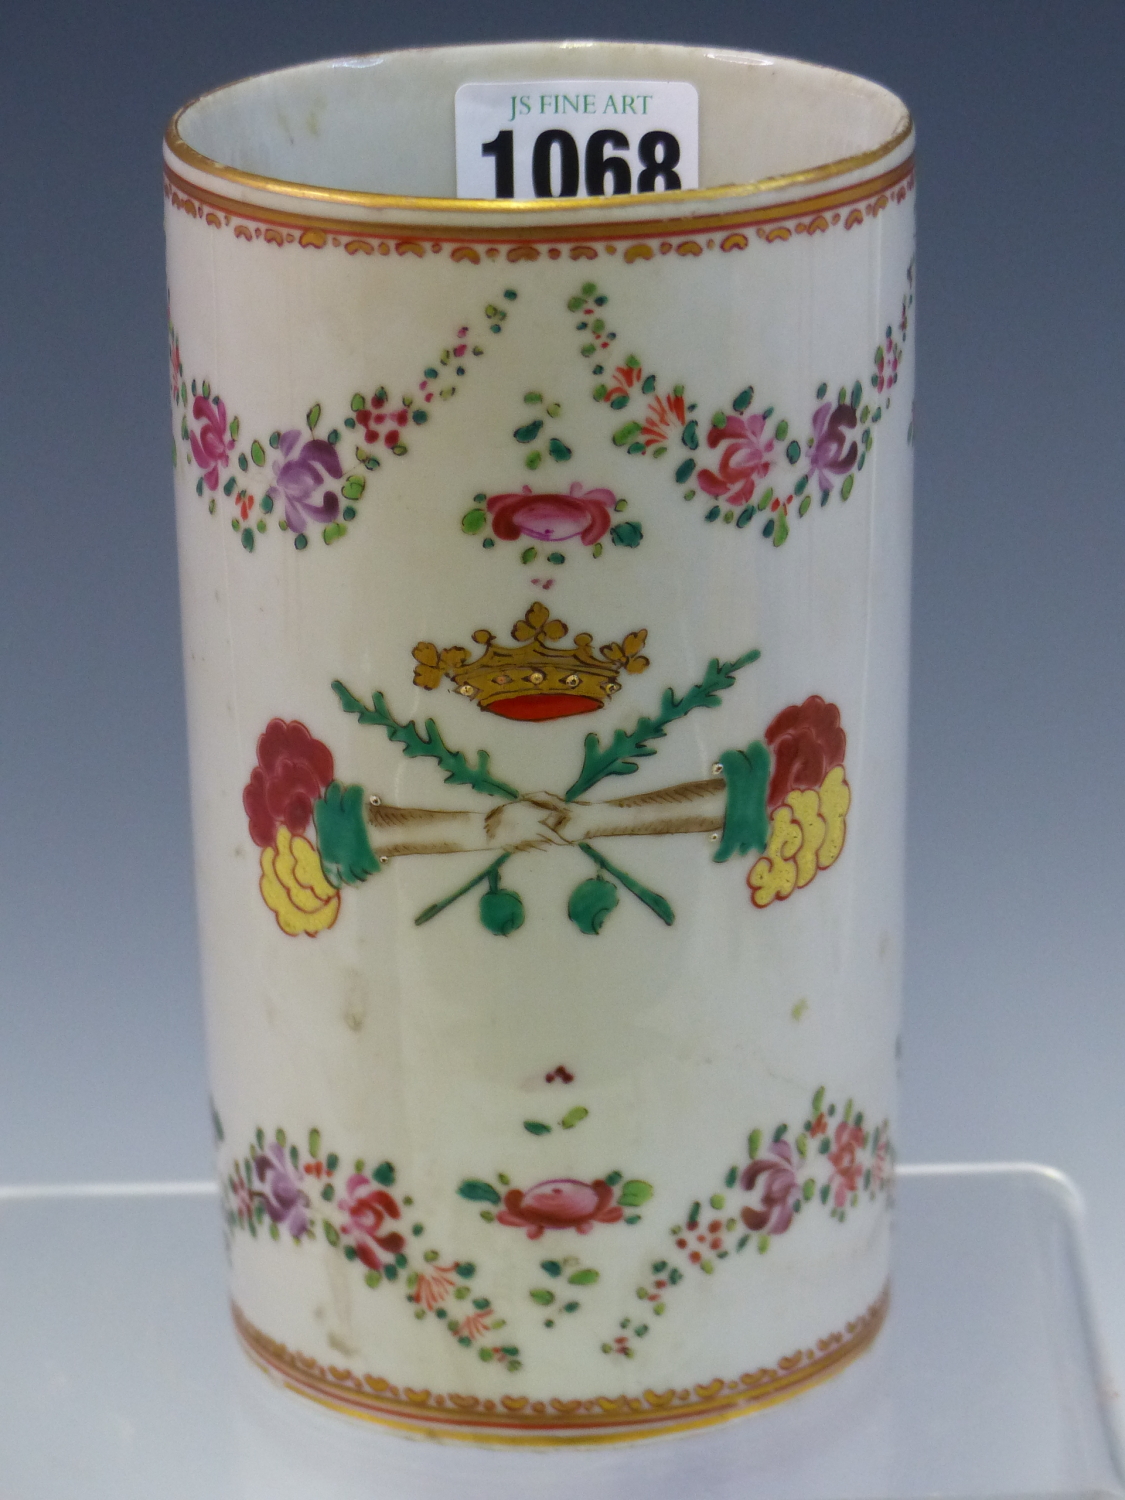 A LATE 19th C. CHINESE EXPORT SSTYLE CYLINDRICAL MUG, THE SWAGS OF FLOWERS ABOVE AND BELOW THE - Image 2 of 7